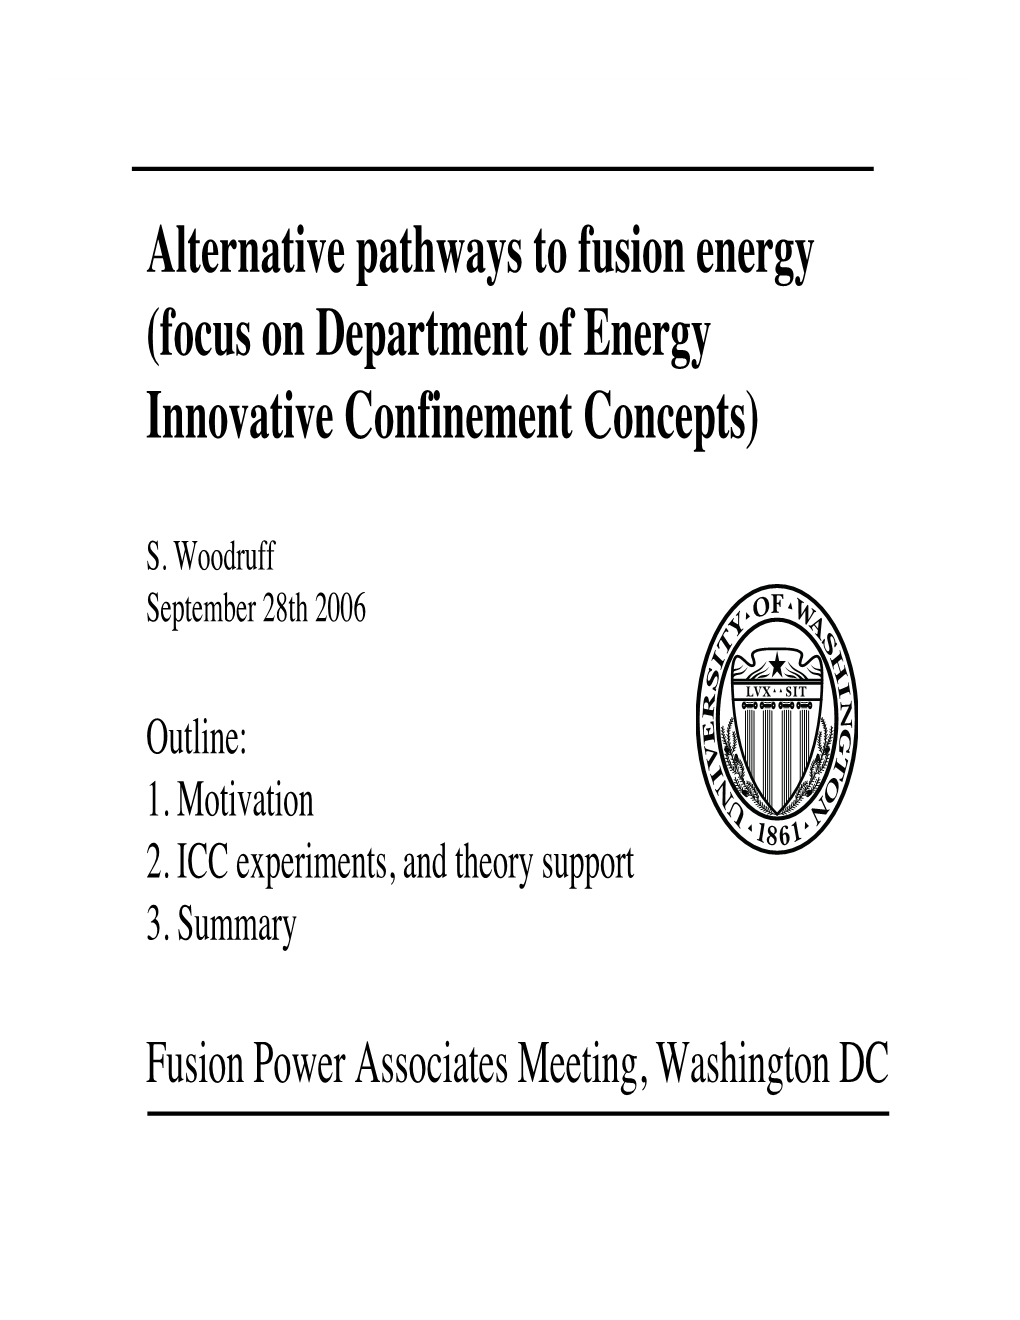 Alternative Pathways to Fusion Energy (Focus on Department of Energy Innovative Confinement Concepts)